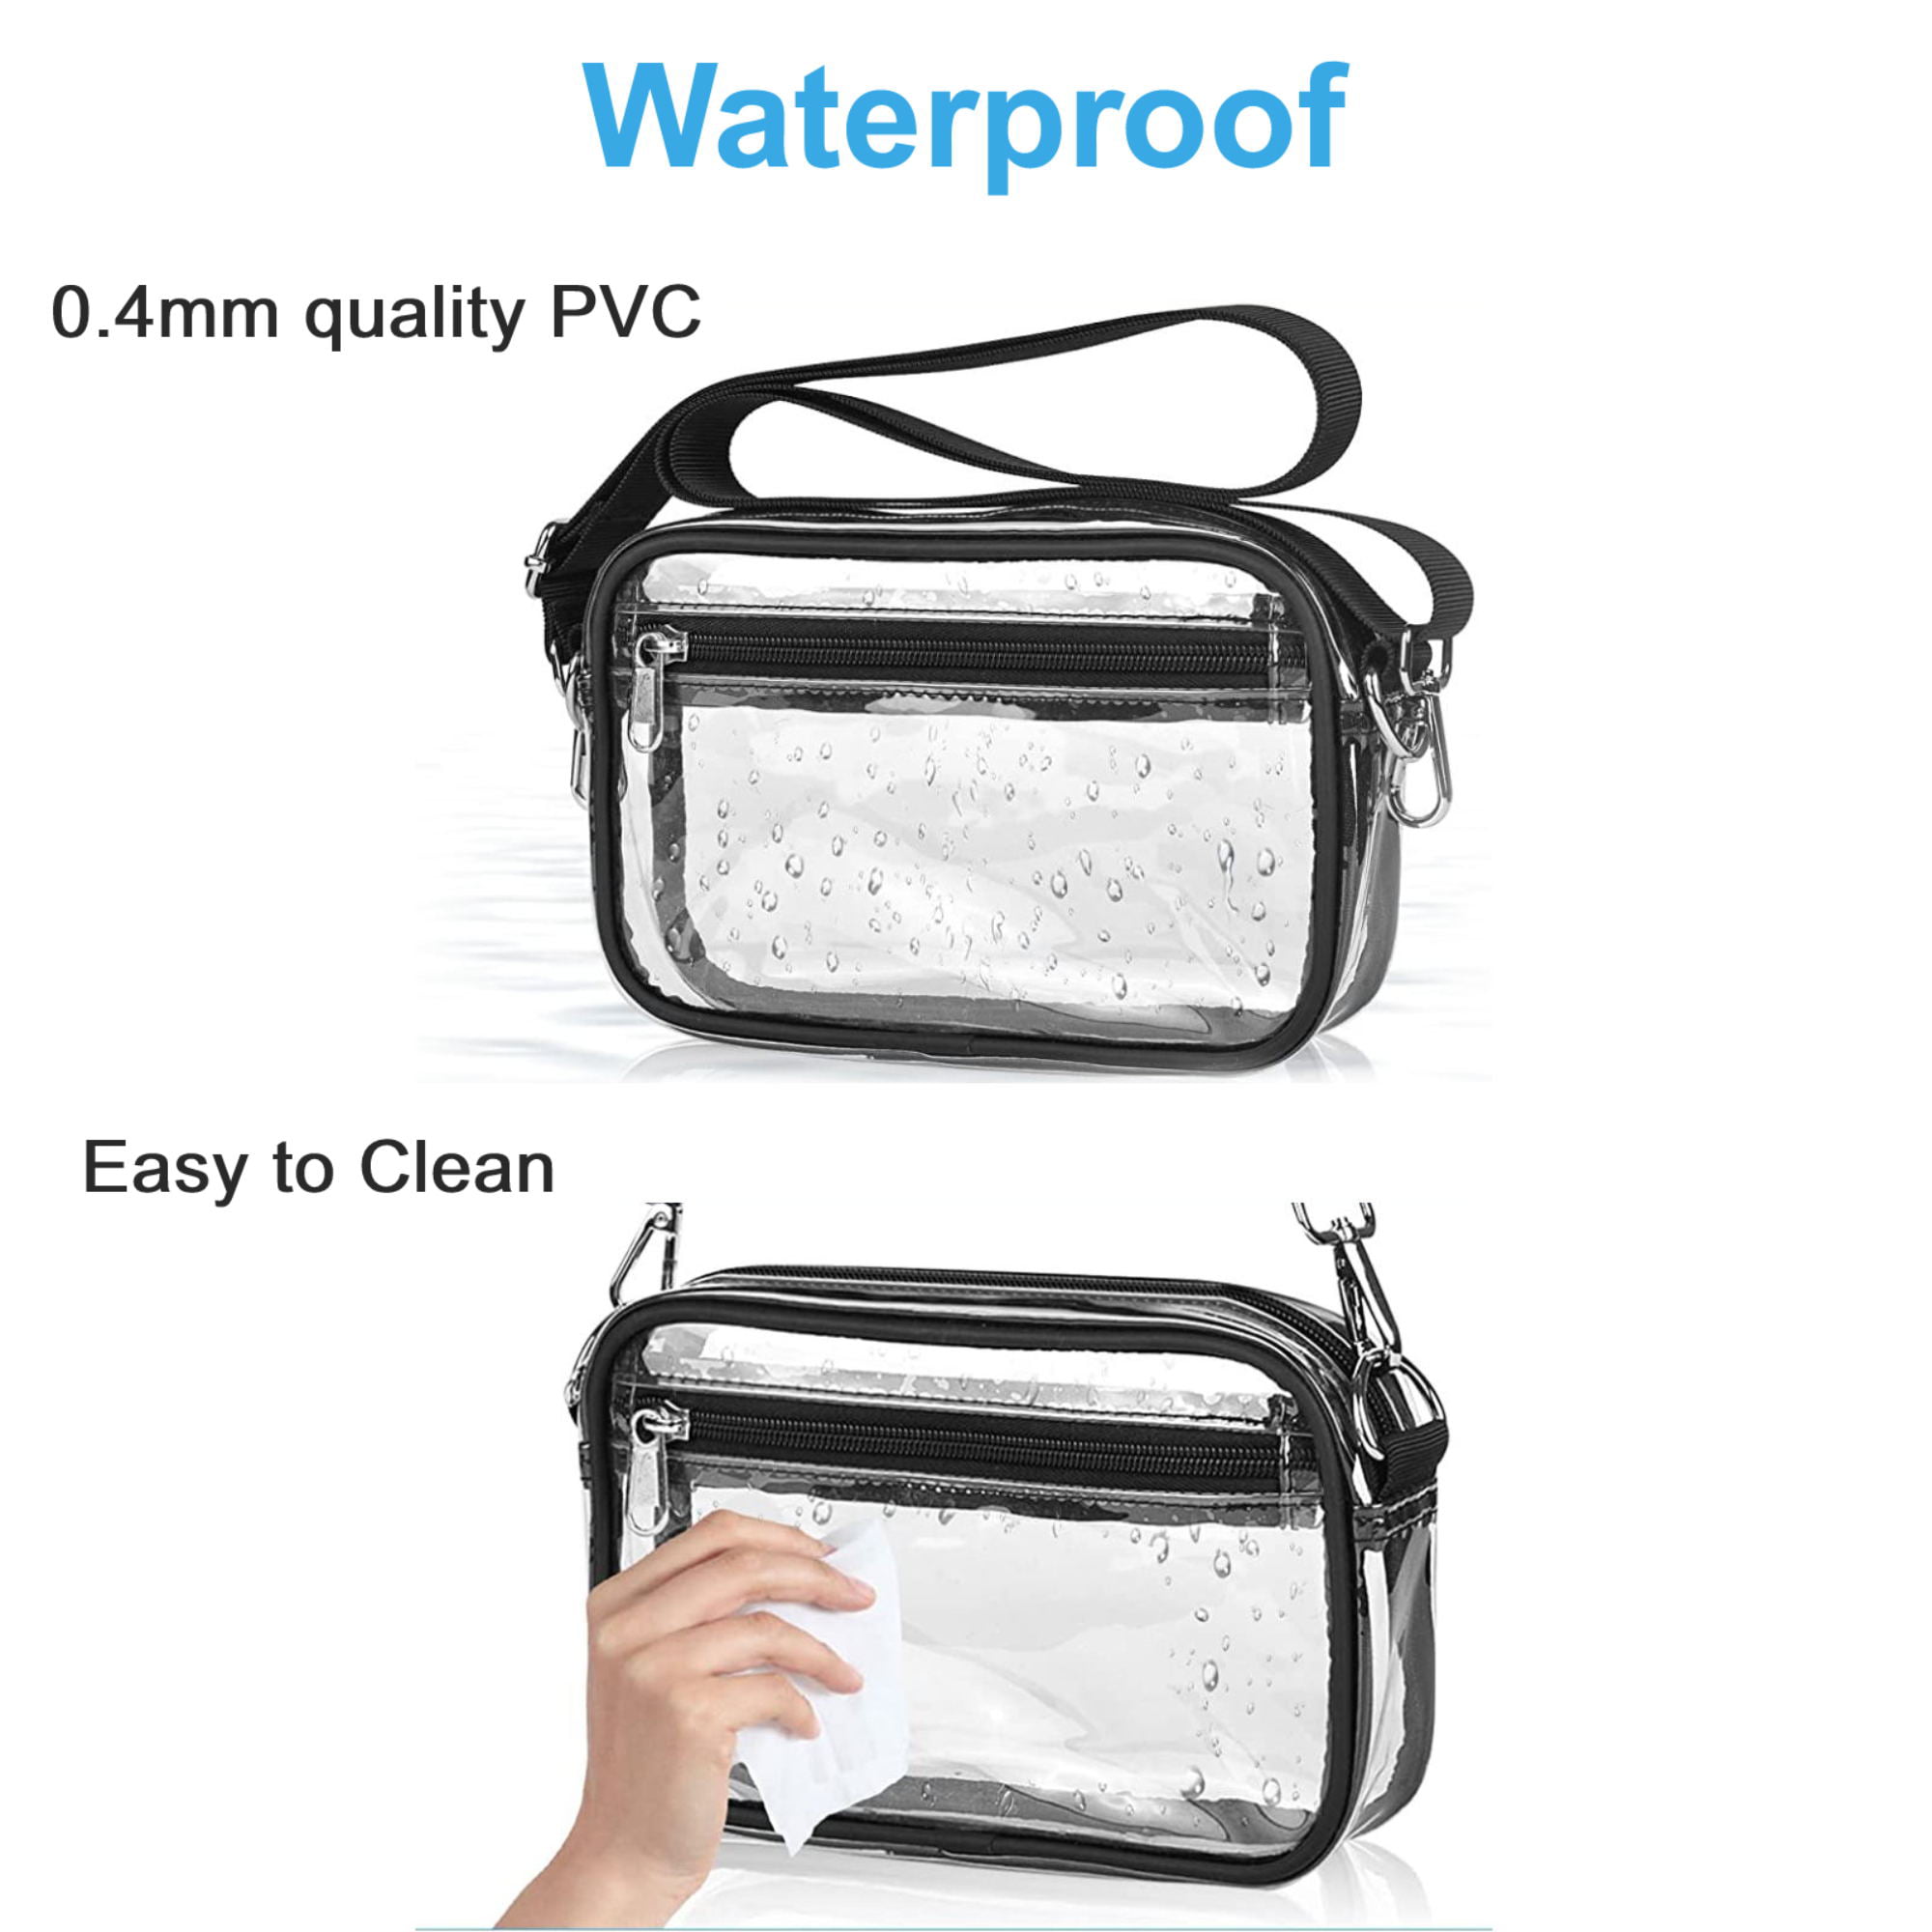  Juoxeepy Clear Bag Stadium Approved Purse Concert Crossbody  Sports Events PVC Shoulder Clutch : Sports & Outdoors